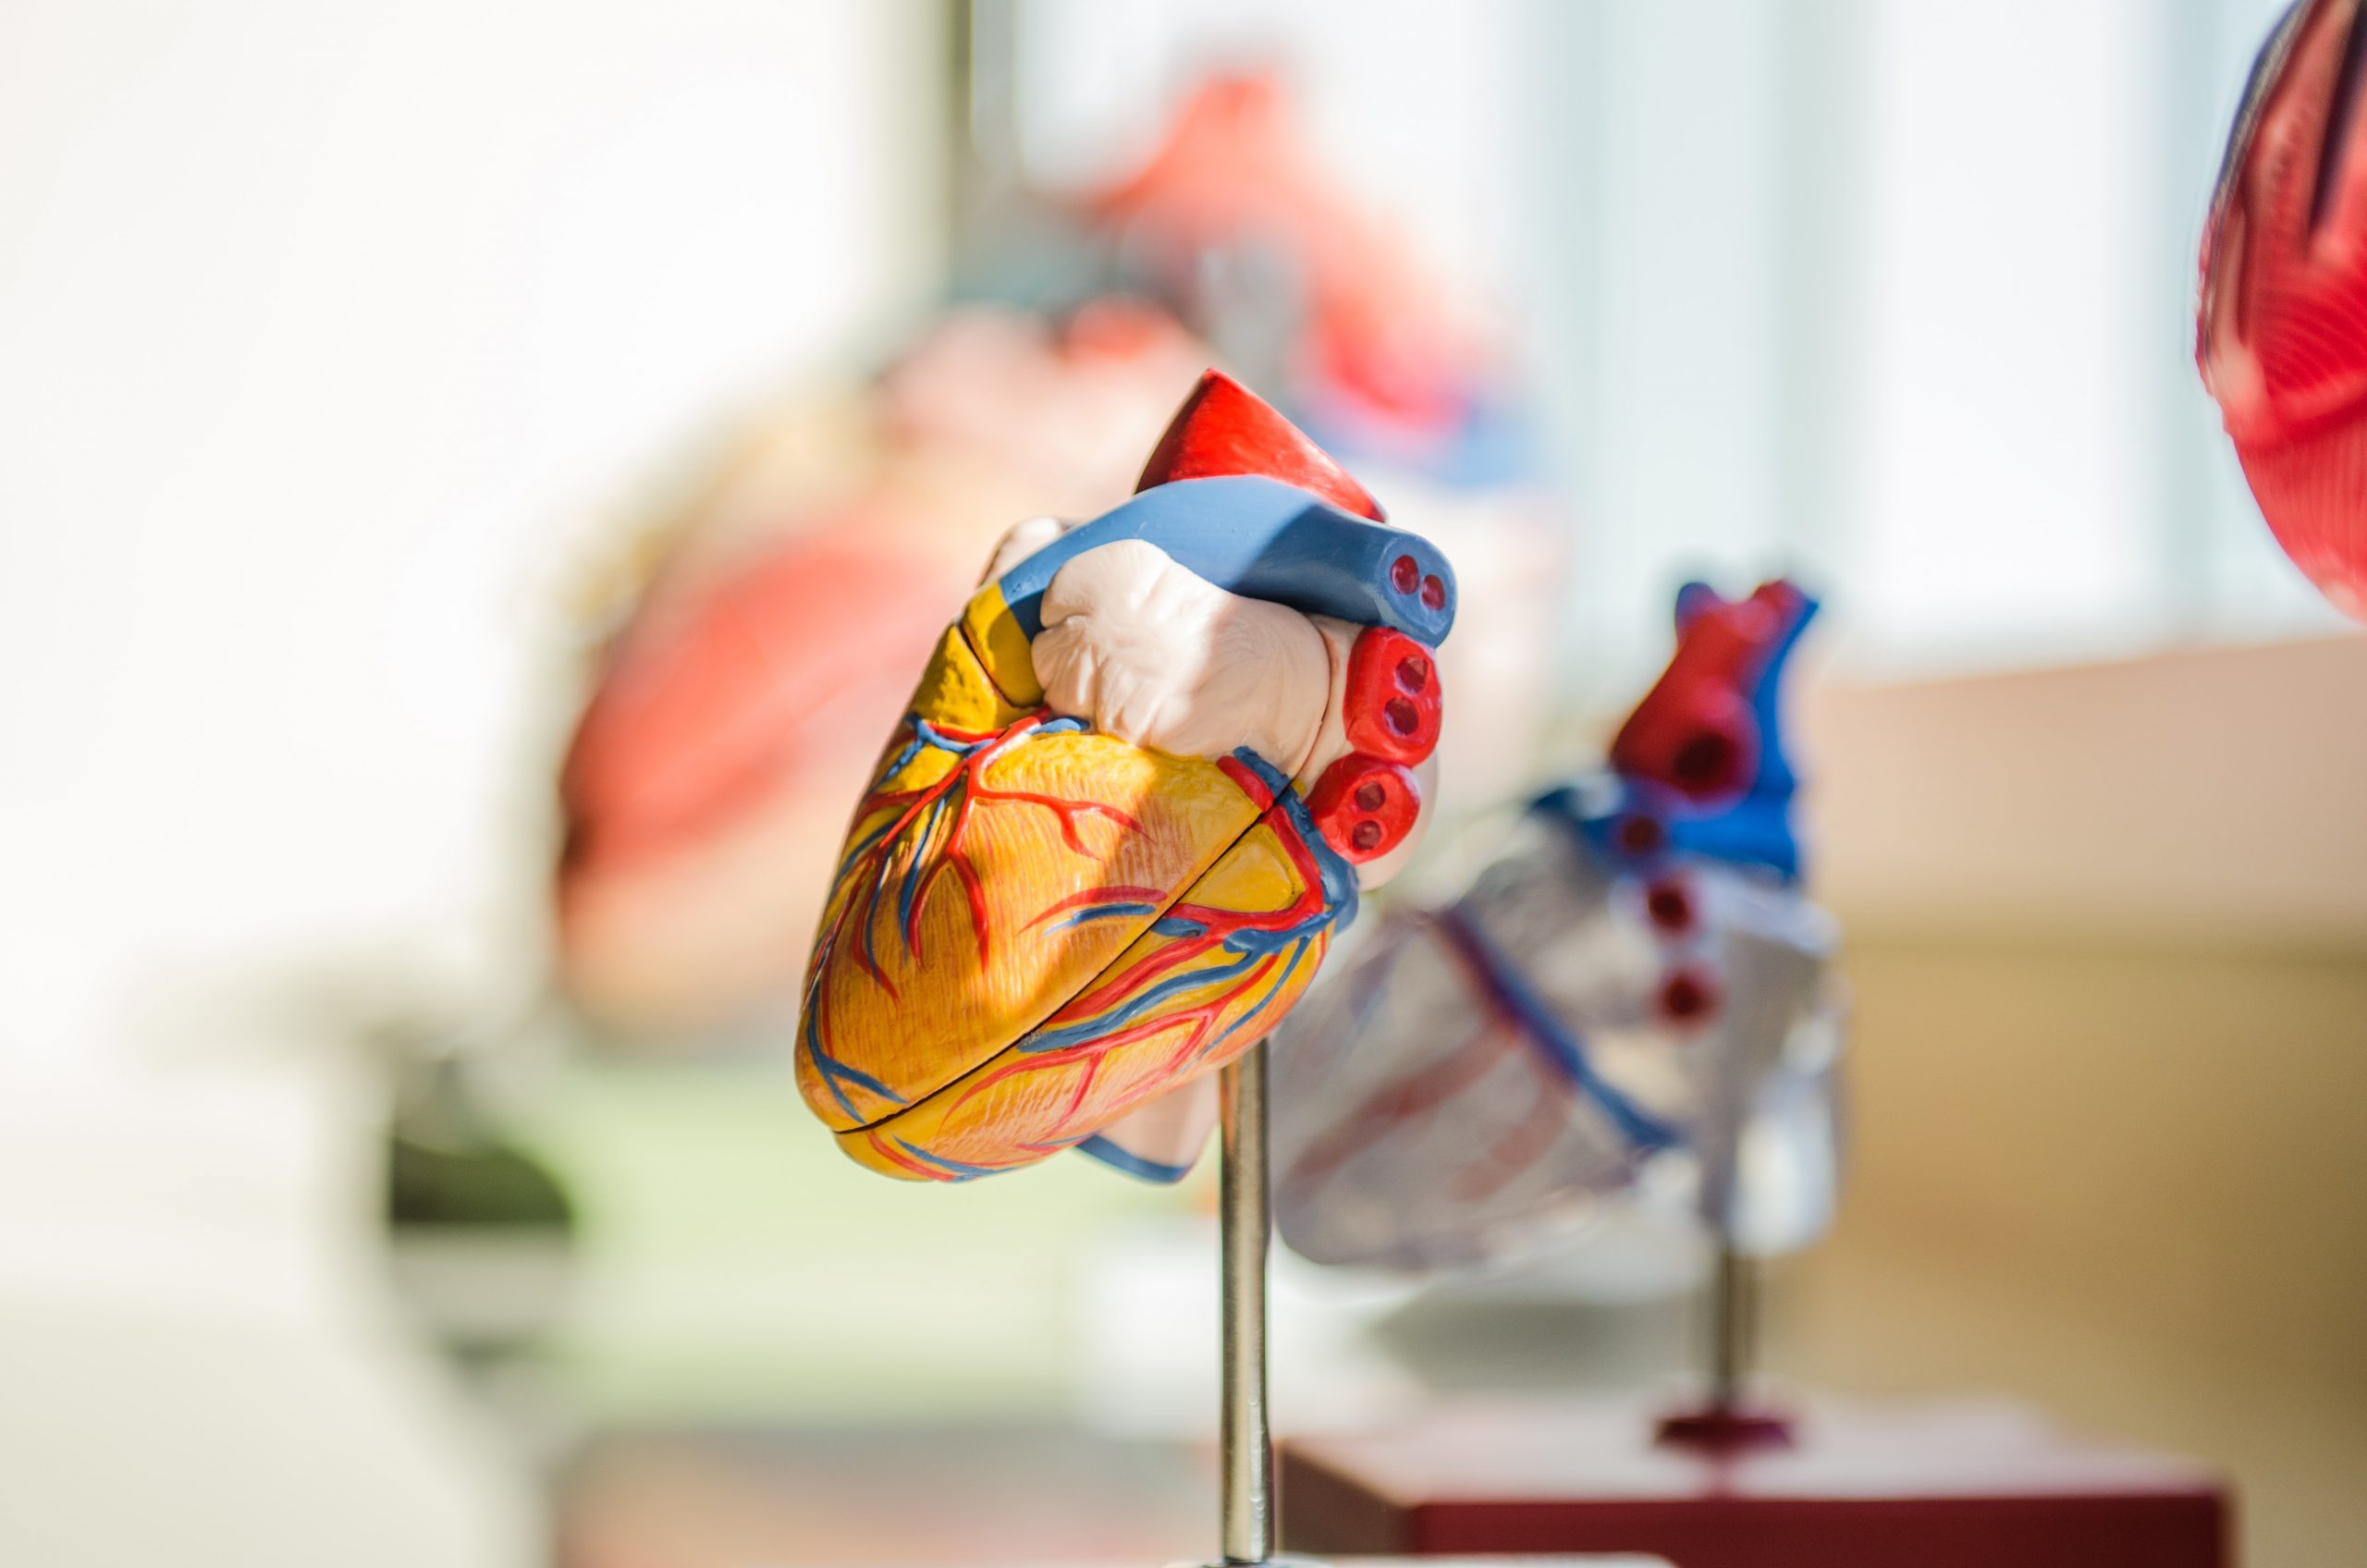 heart model showing arteries, veins, chambers, aorta, valves all color coded